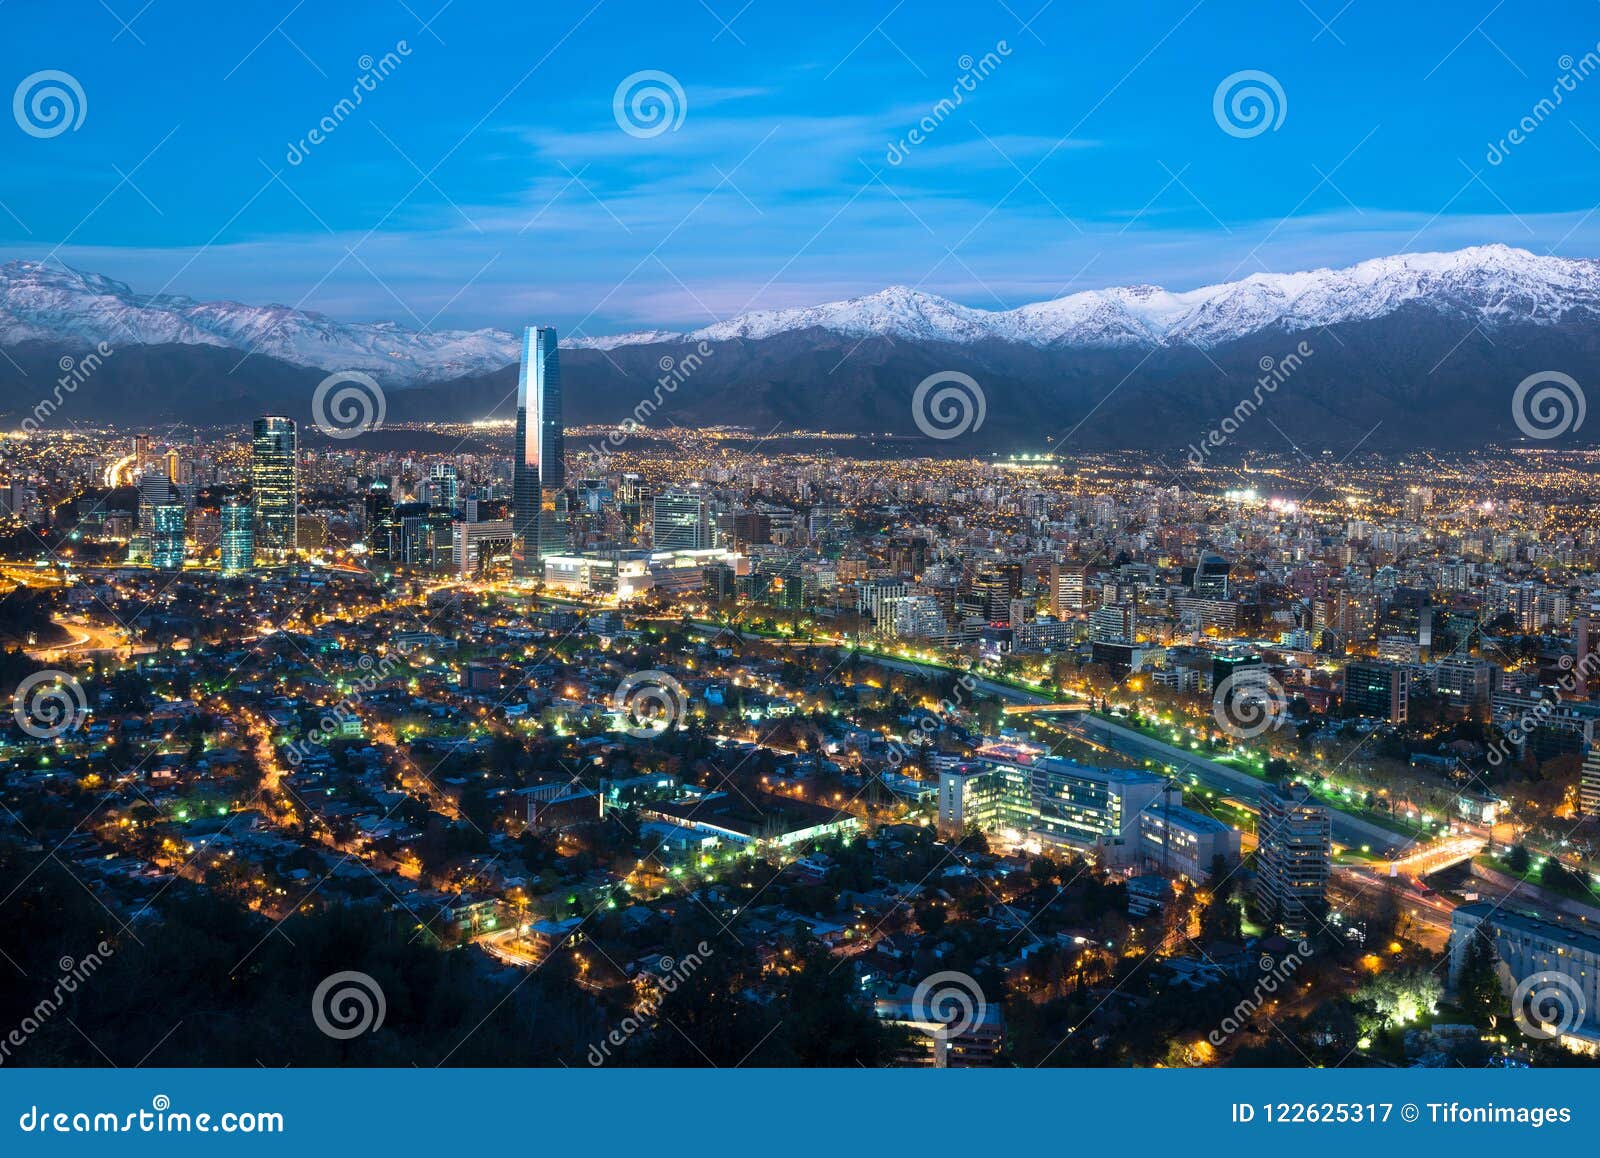 panoramic view of providencia and las condes districts with mapocho river and los andes mountain range in santiago